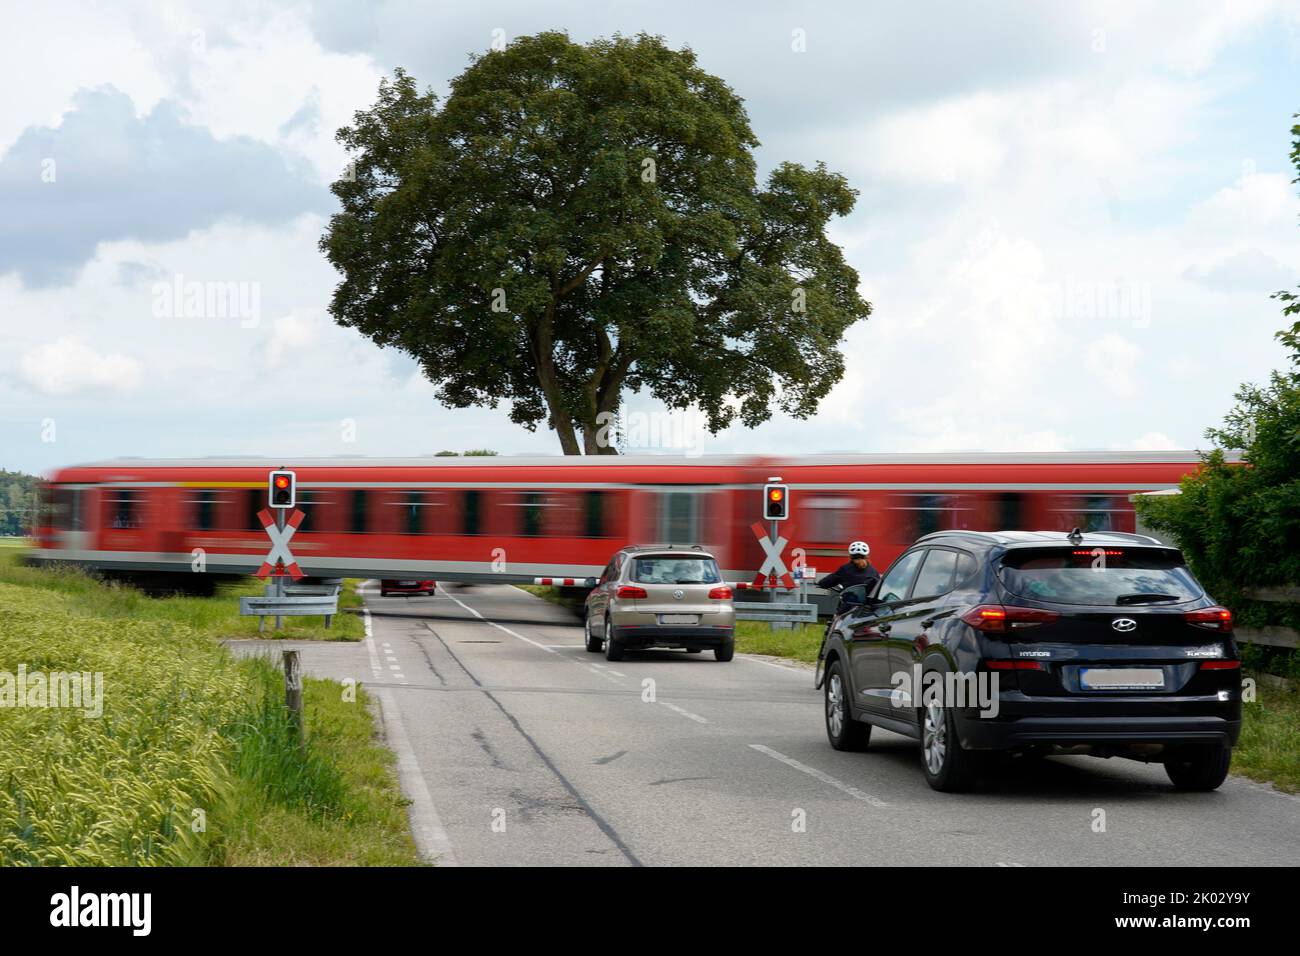 Germany, Bavaria, Altötting district, country road, level crossing with barriers, local train passing through, waiting cars Stock Photo